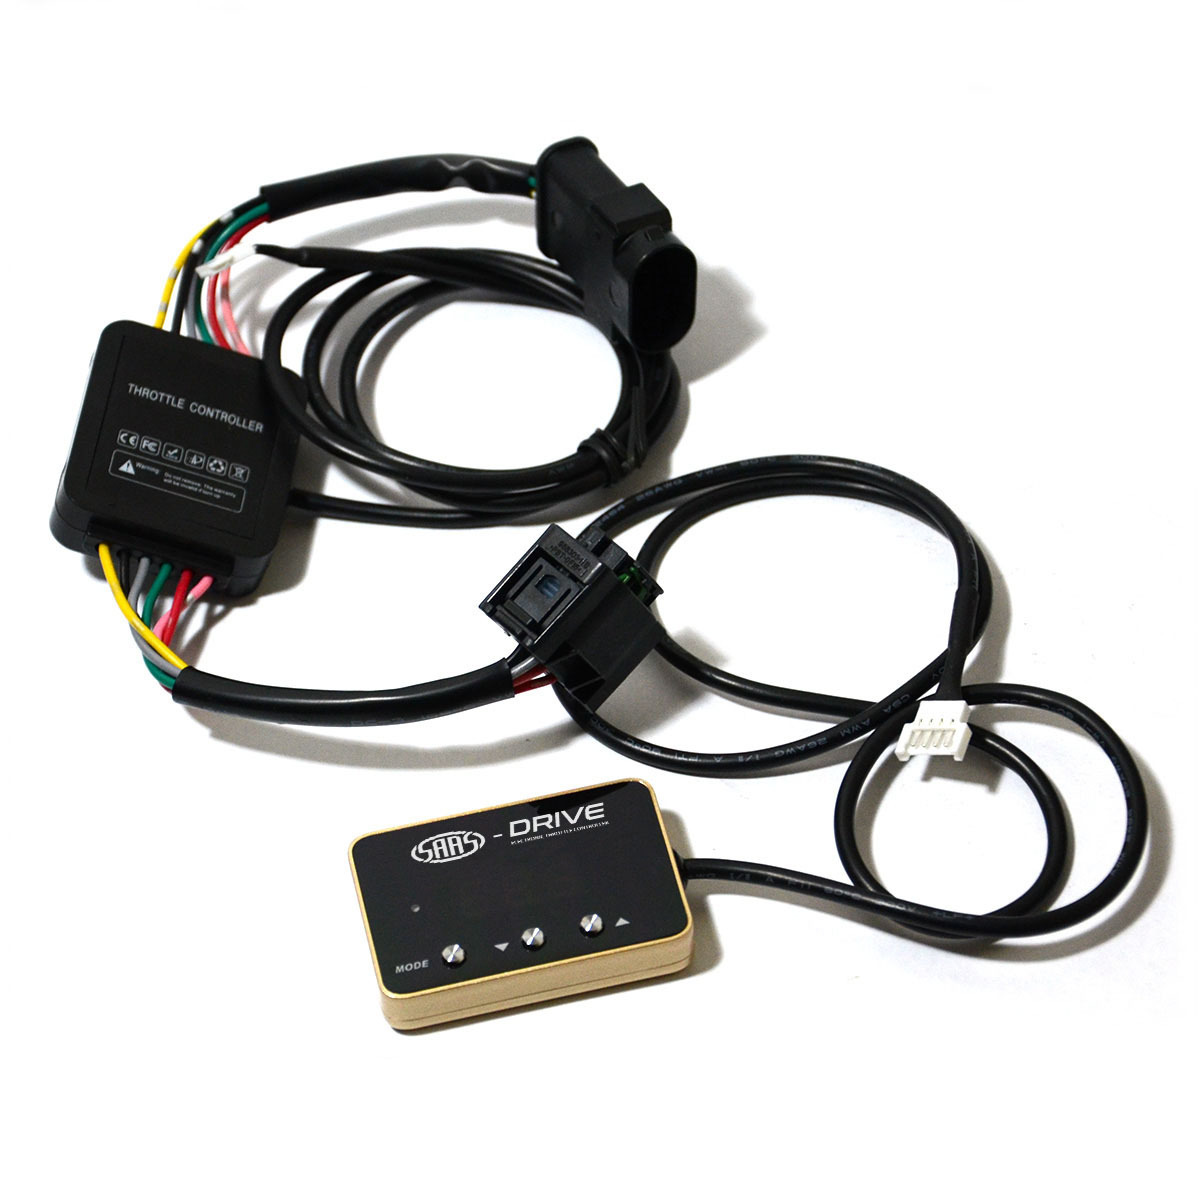 SAAS-Drive Colorado Rodeo DMax Throttle Controller